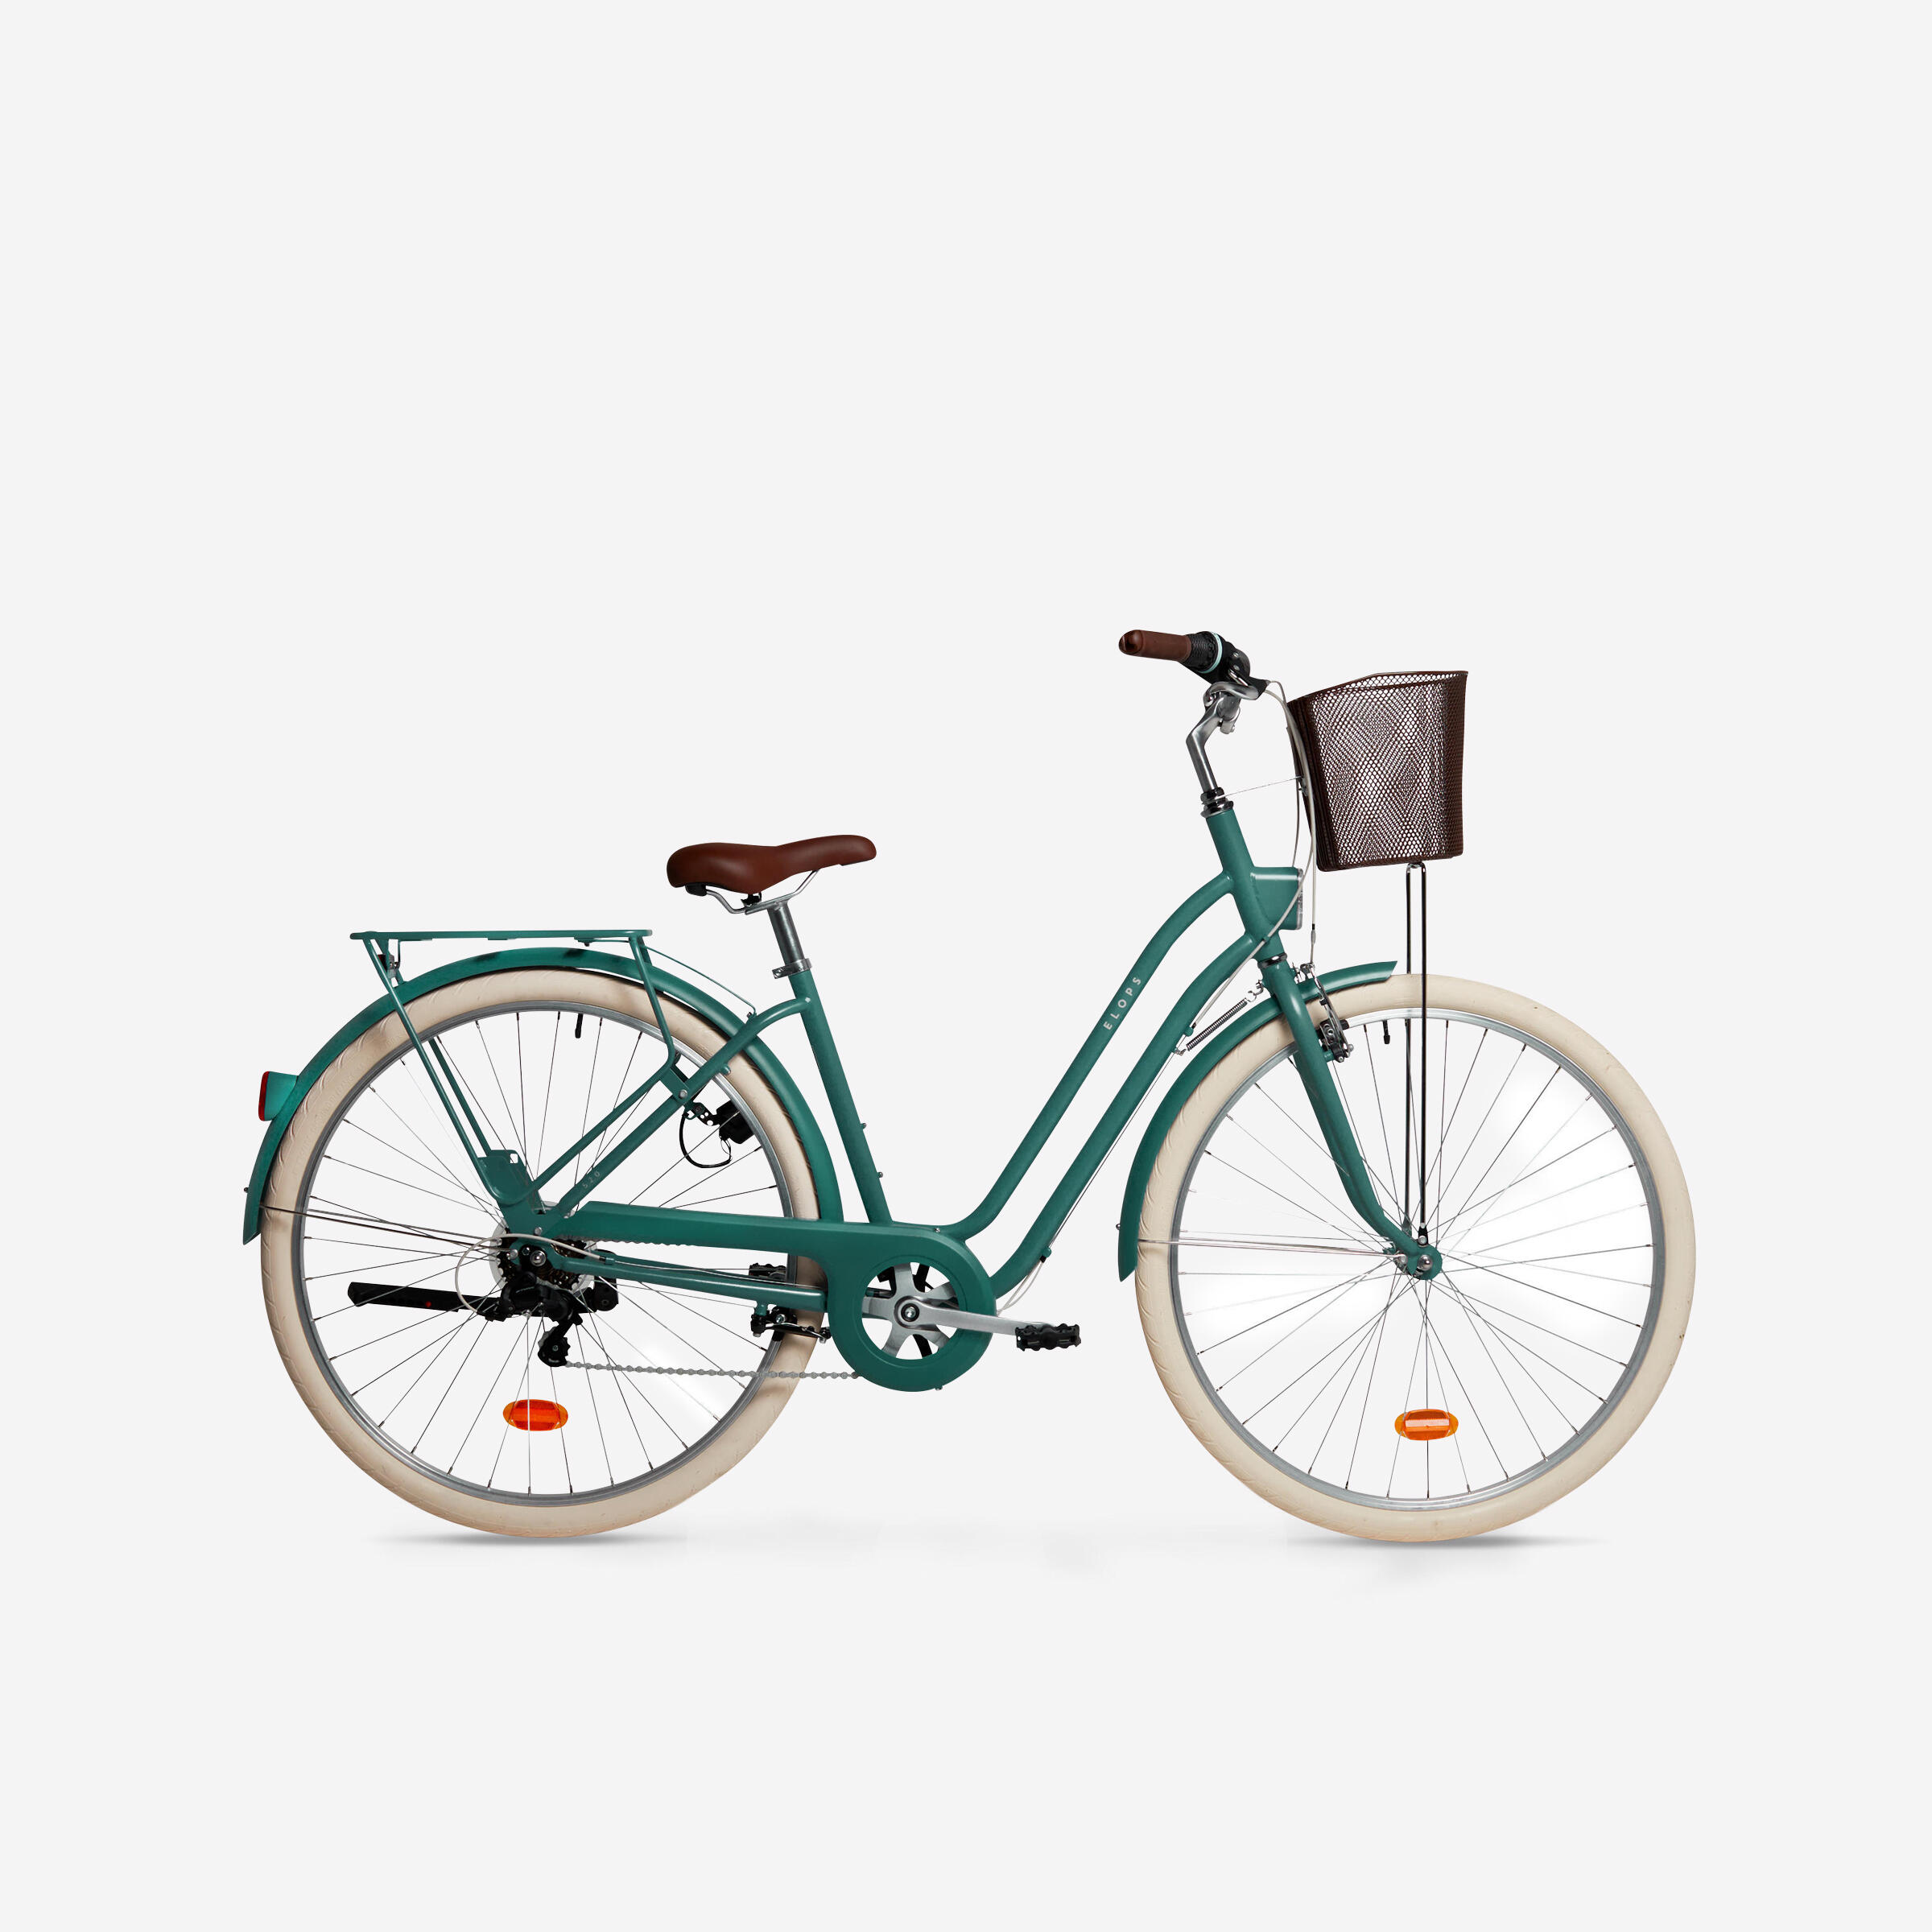 ELOPS Fully-equipped, 6-speed low frame city bike, green